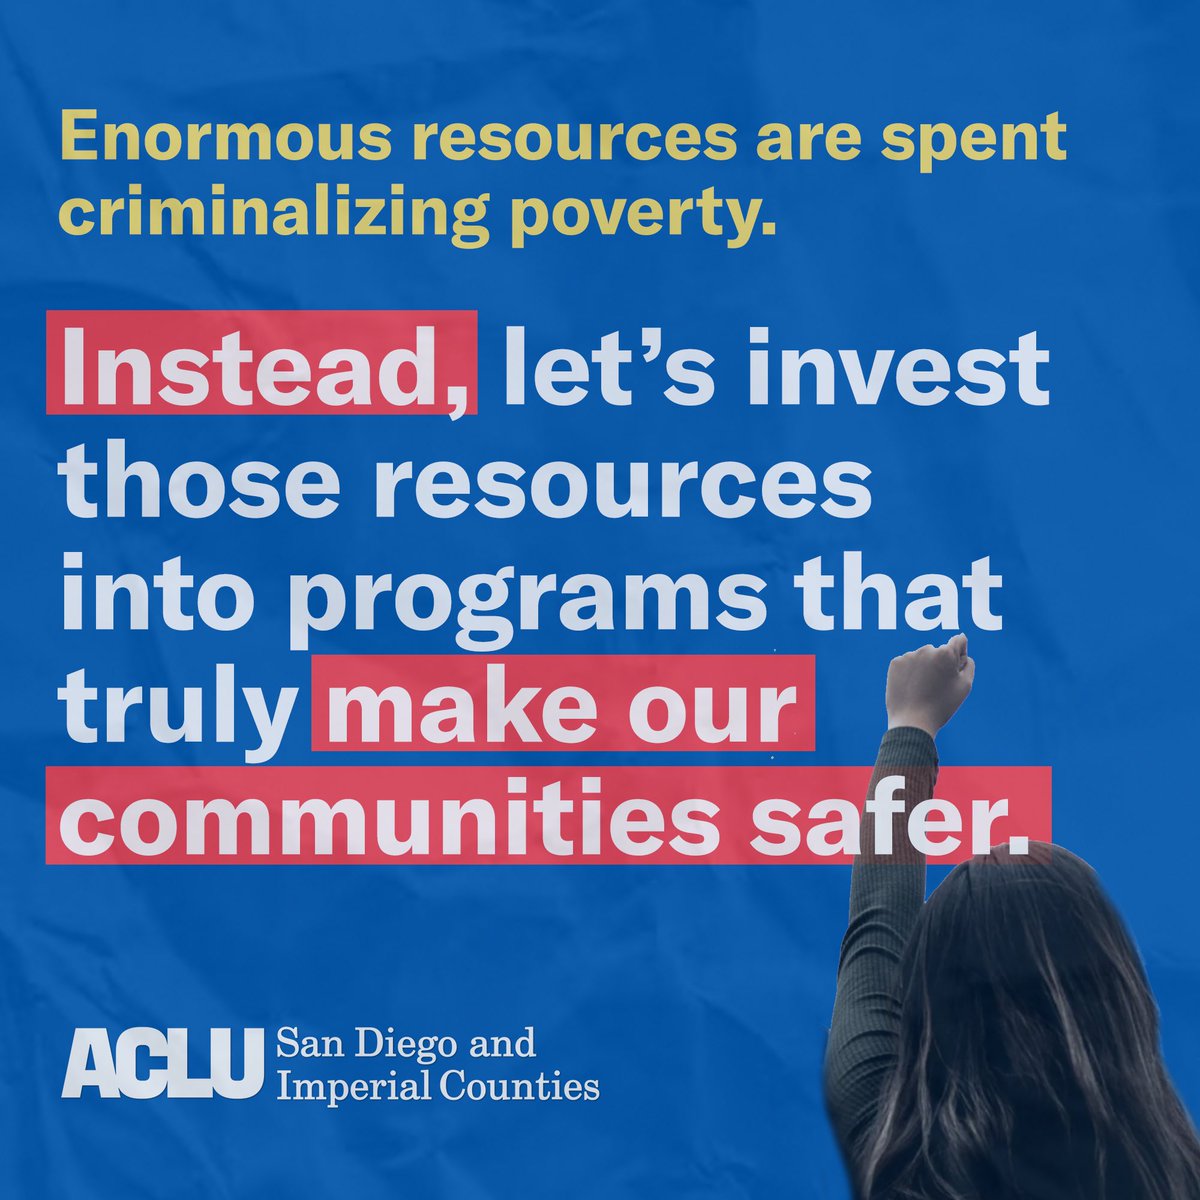 The people’s county budget should invest in housing, education, public health, mental health and other programs that truly make our communities safer. Join us in the fight for equality, liberty and justice. Visit aclu-sdic.org to get involved.